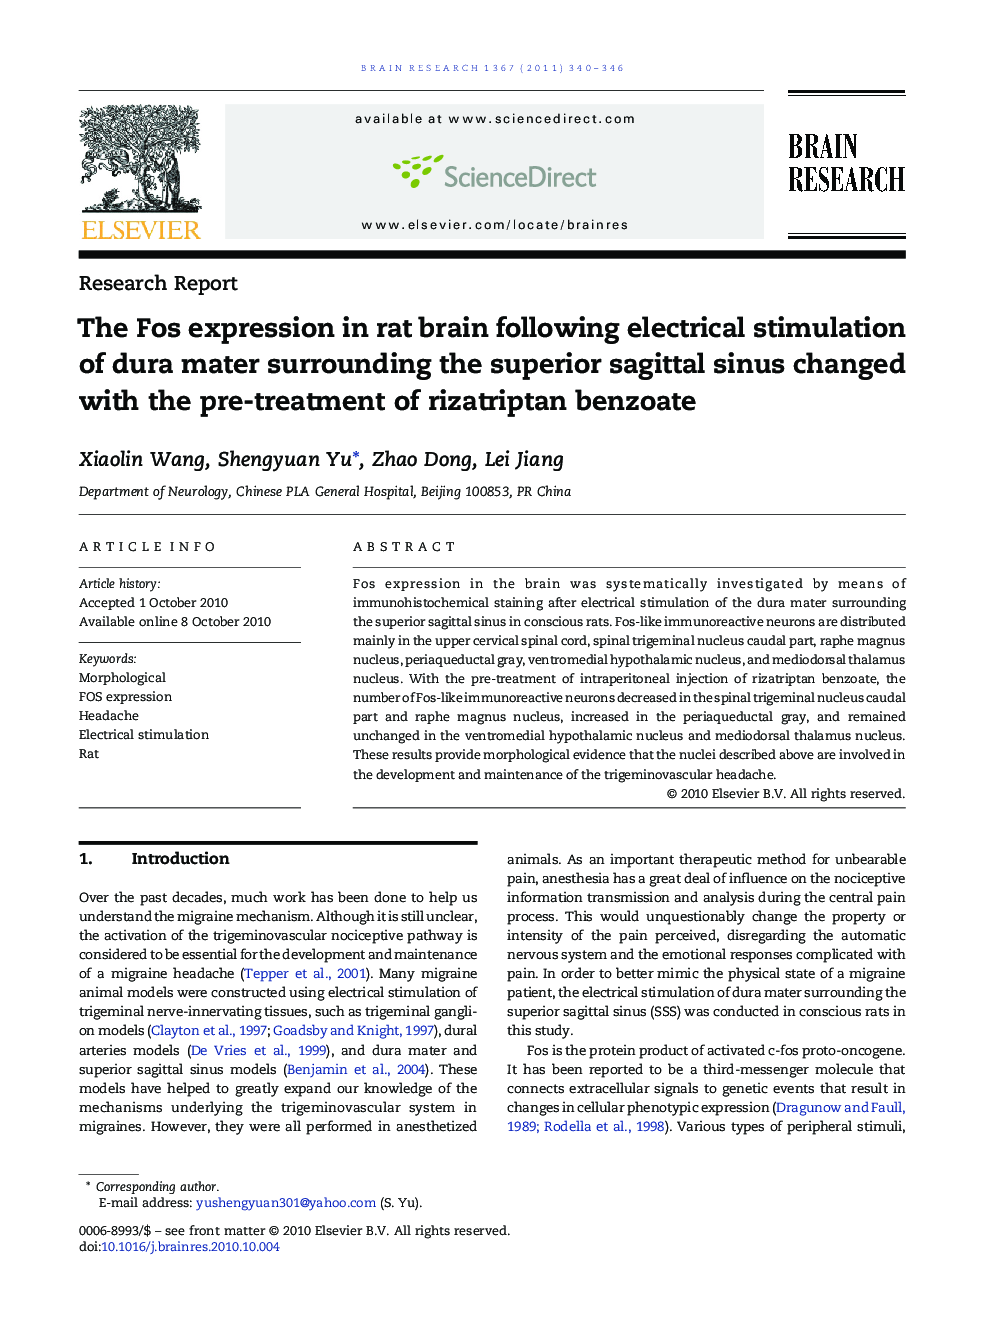 Research ReportThe Fos expression in rat brain following electrical stimulation of dura mater surrounding the superior sagittal sinus changed with the pre-treatment of rizatriptan benzoate